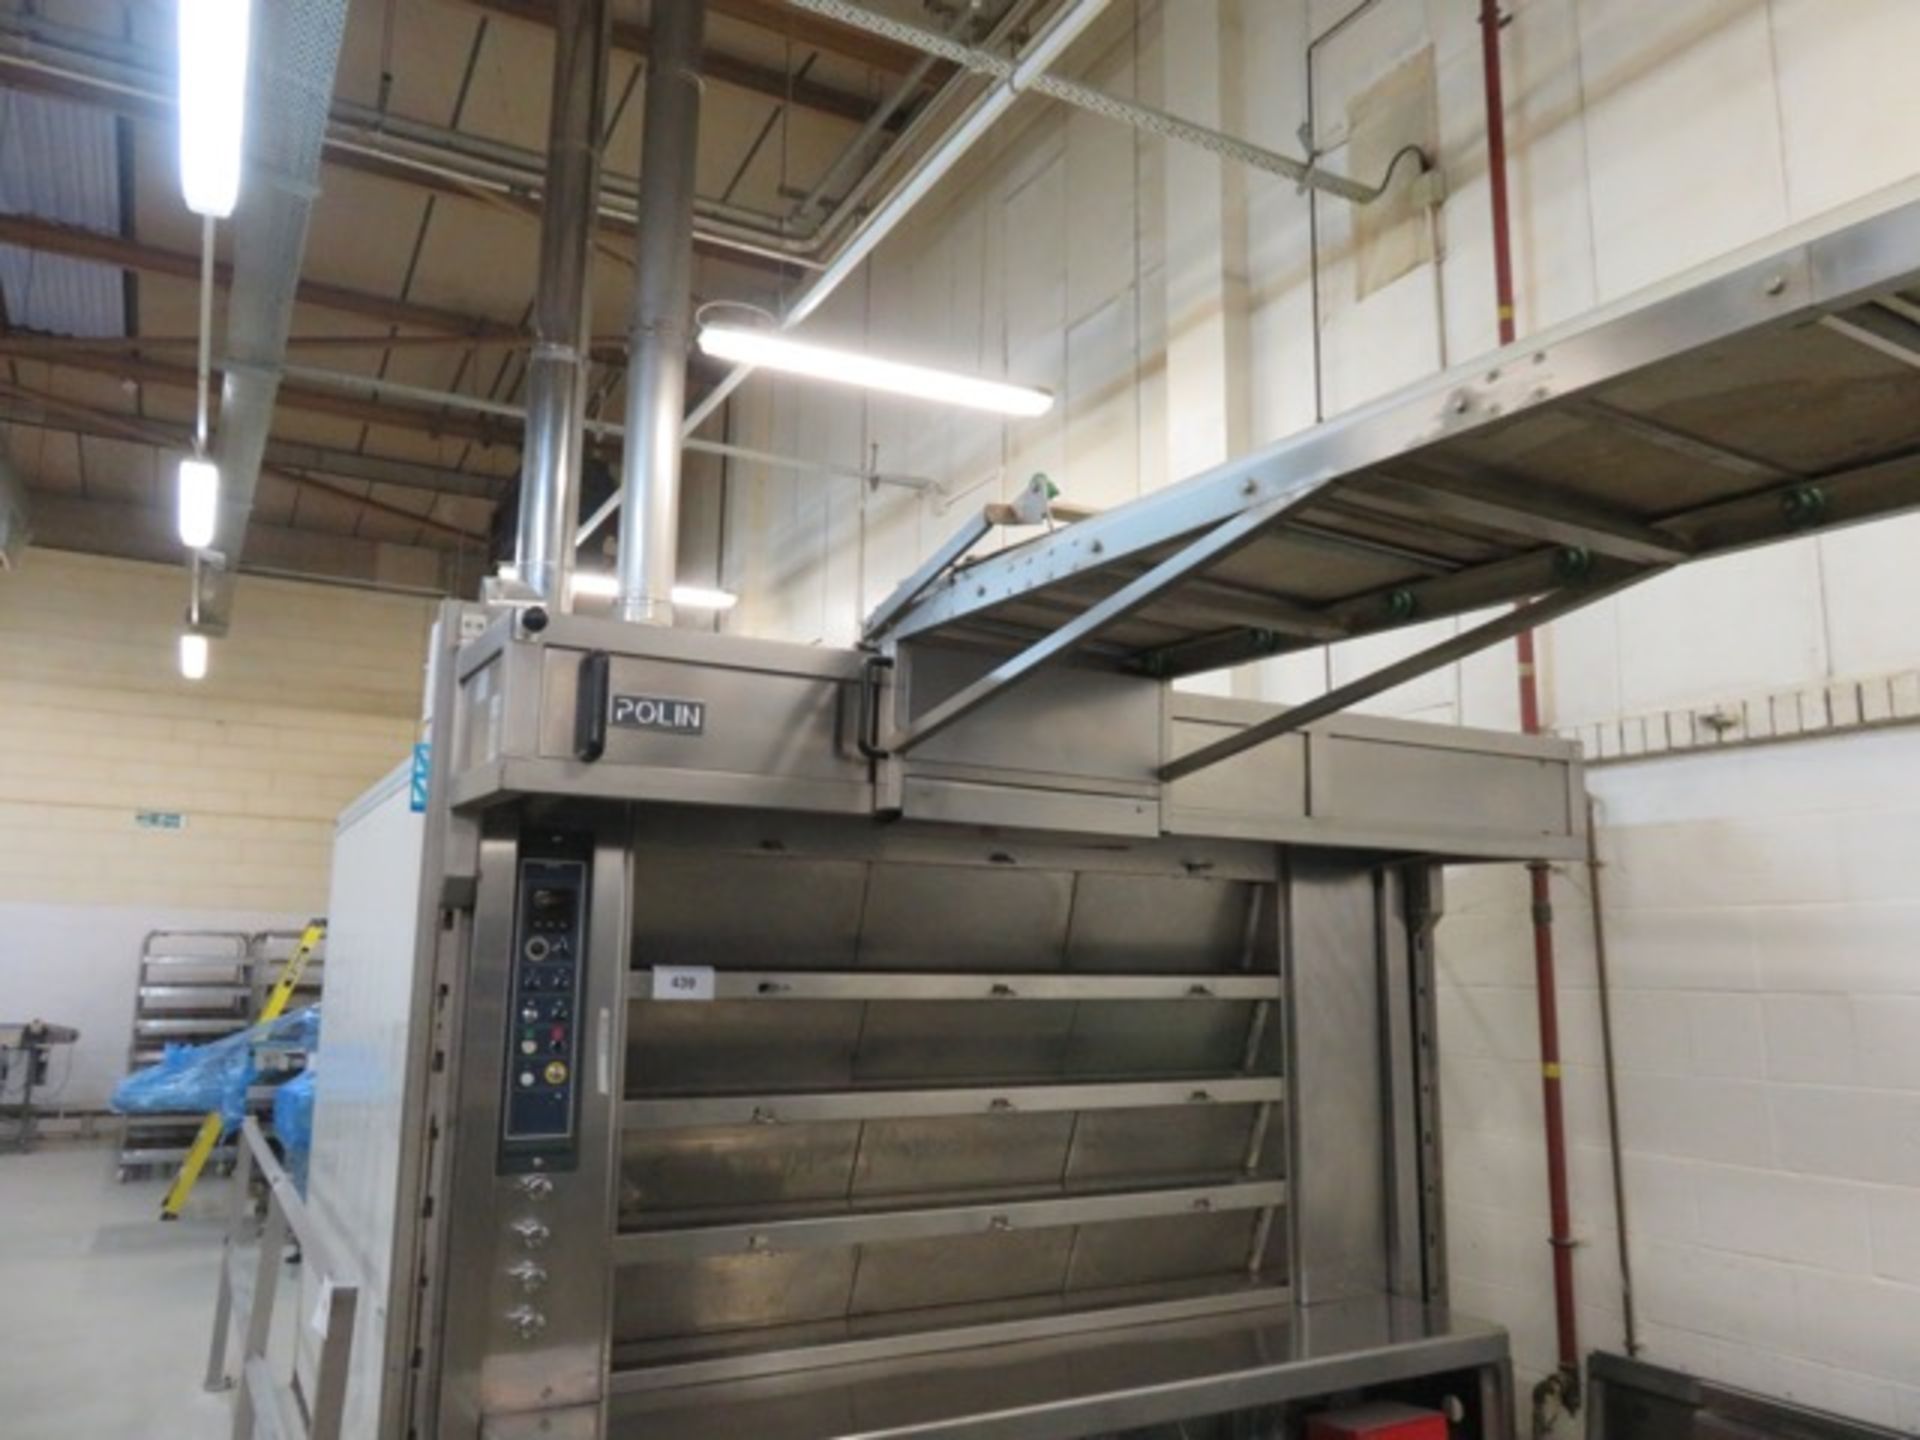 Polin Stonebake Oven with 6 Setter boards lift out charge £300 - Image 3 of 3